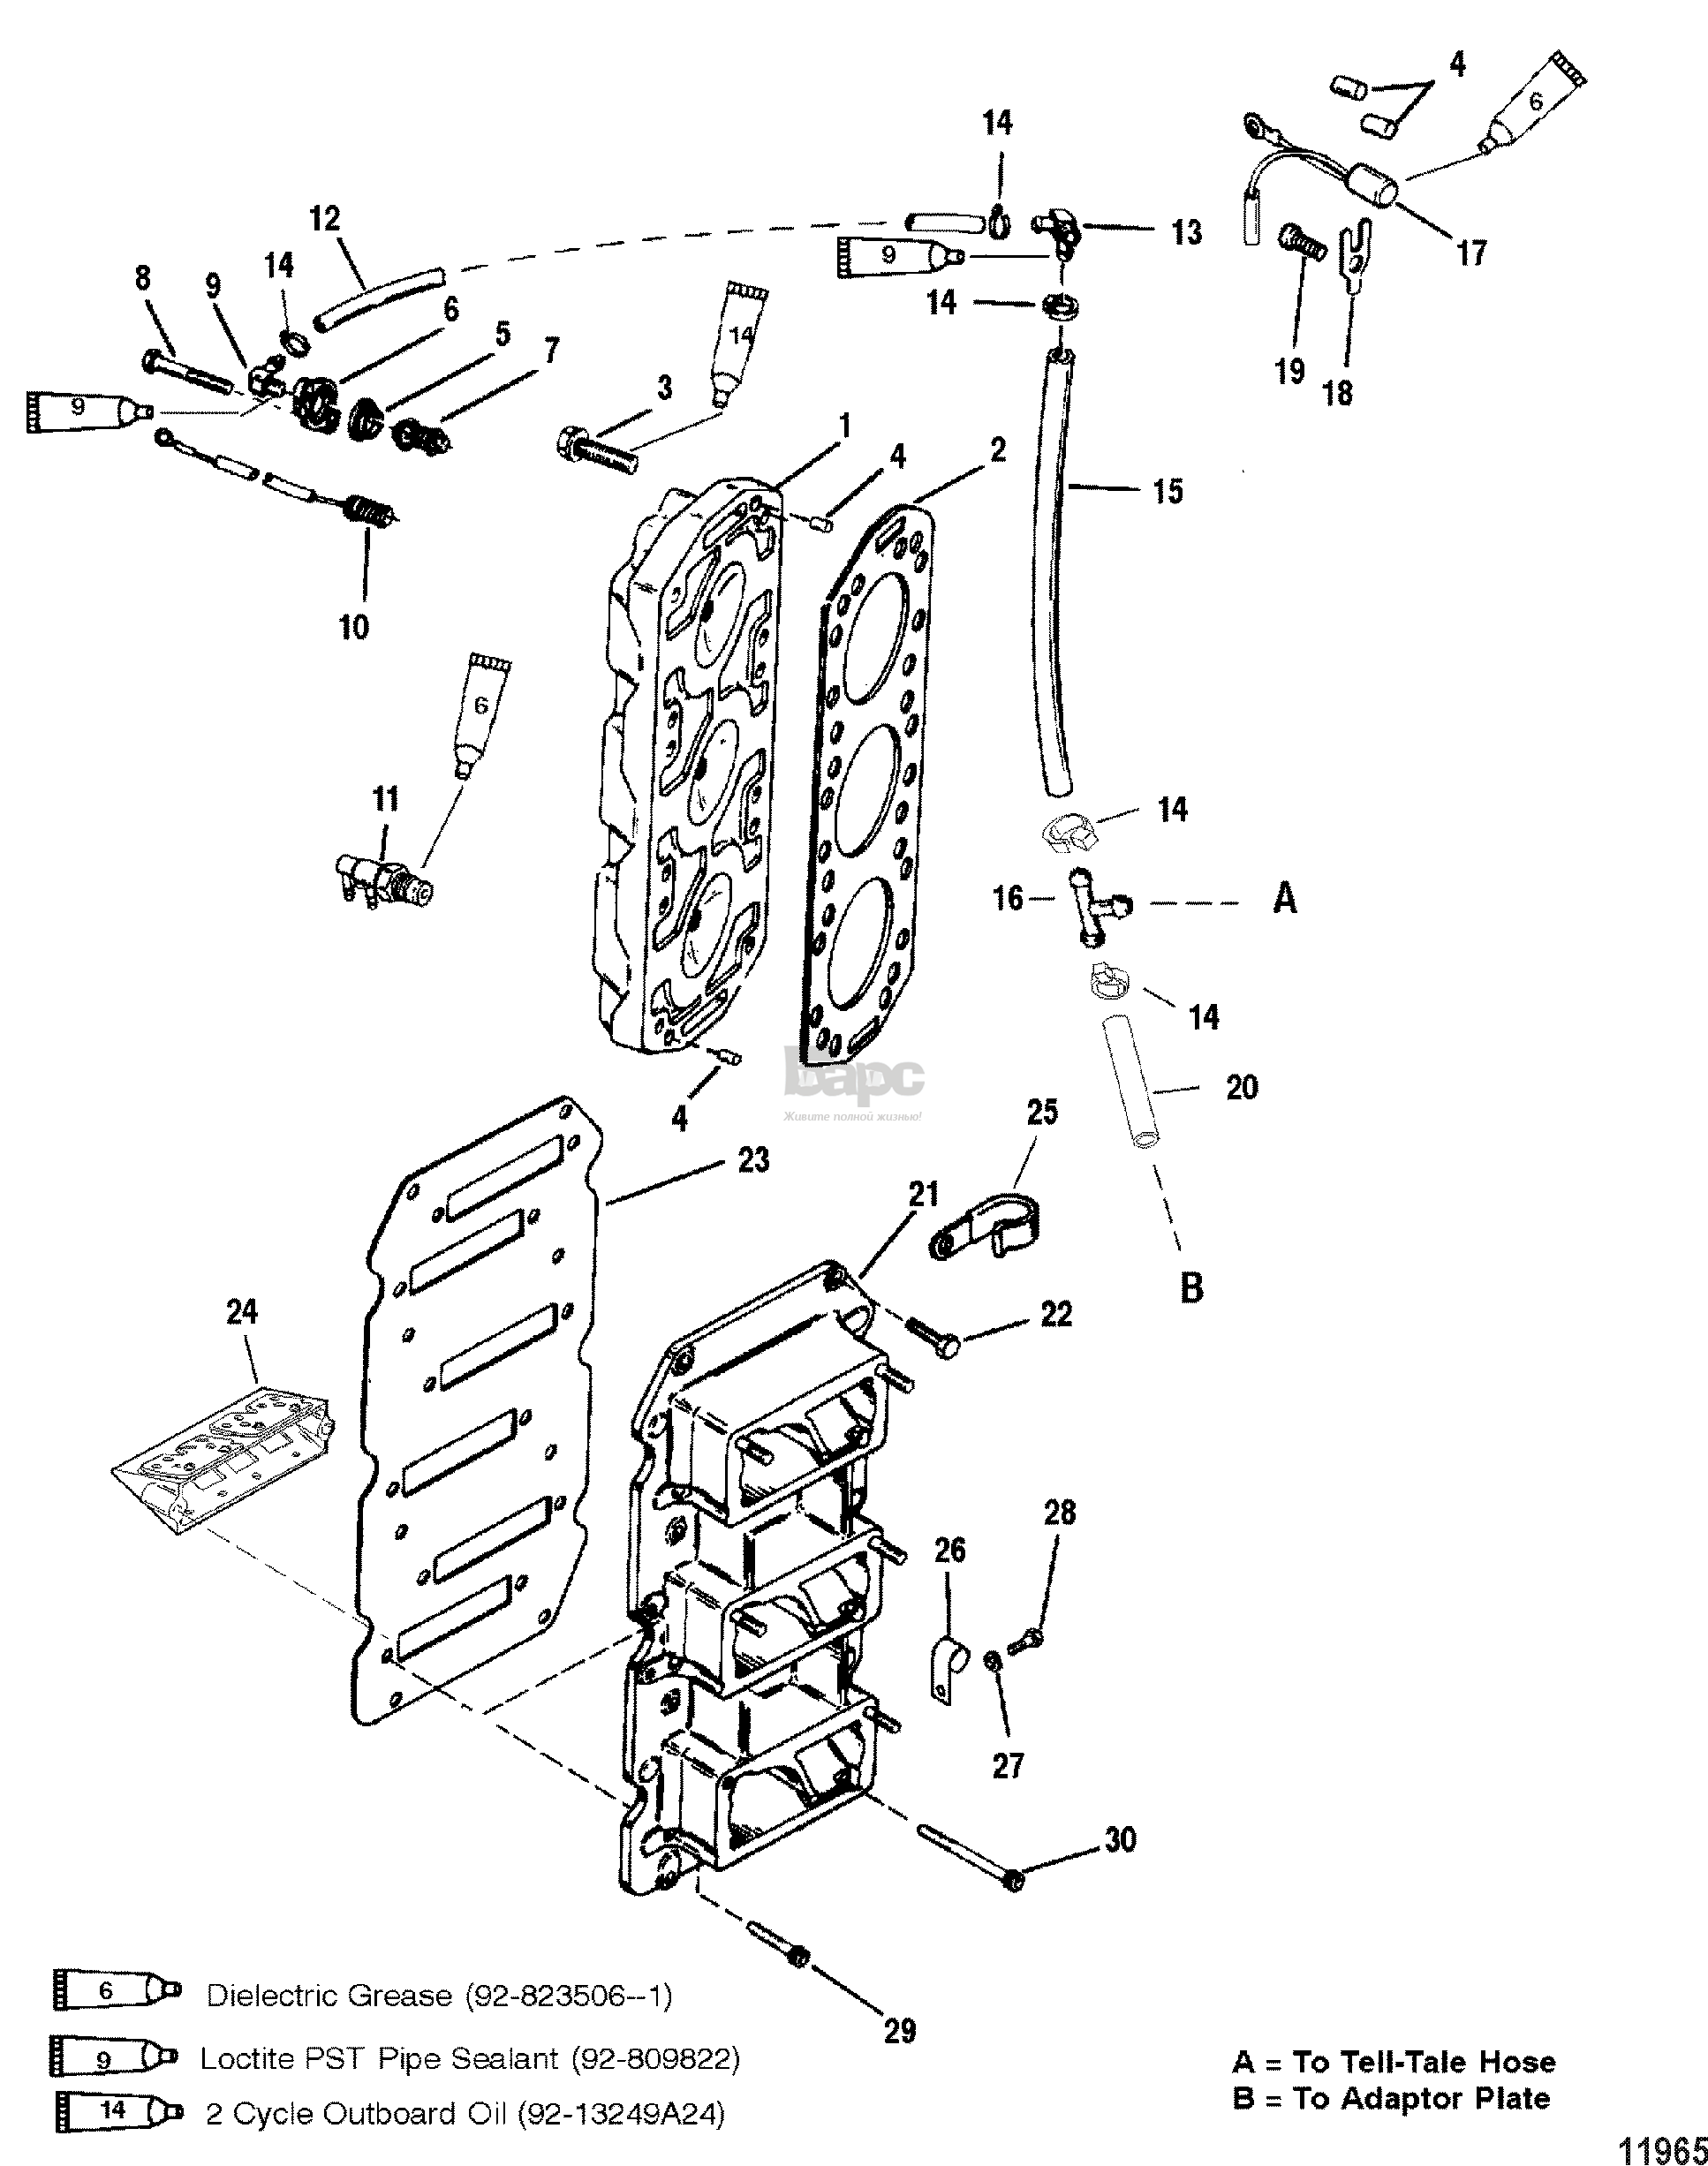 Reed Block And Cylinder Head